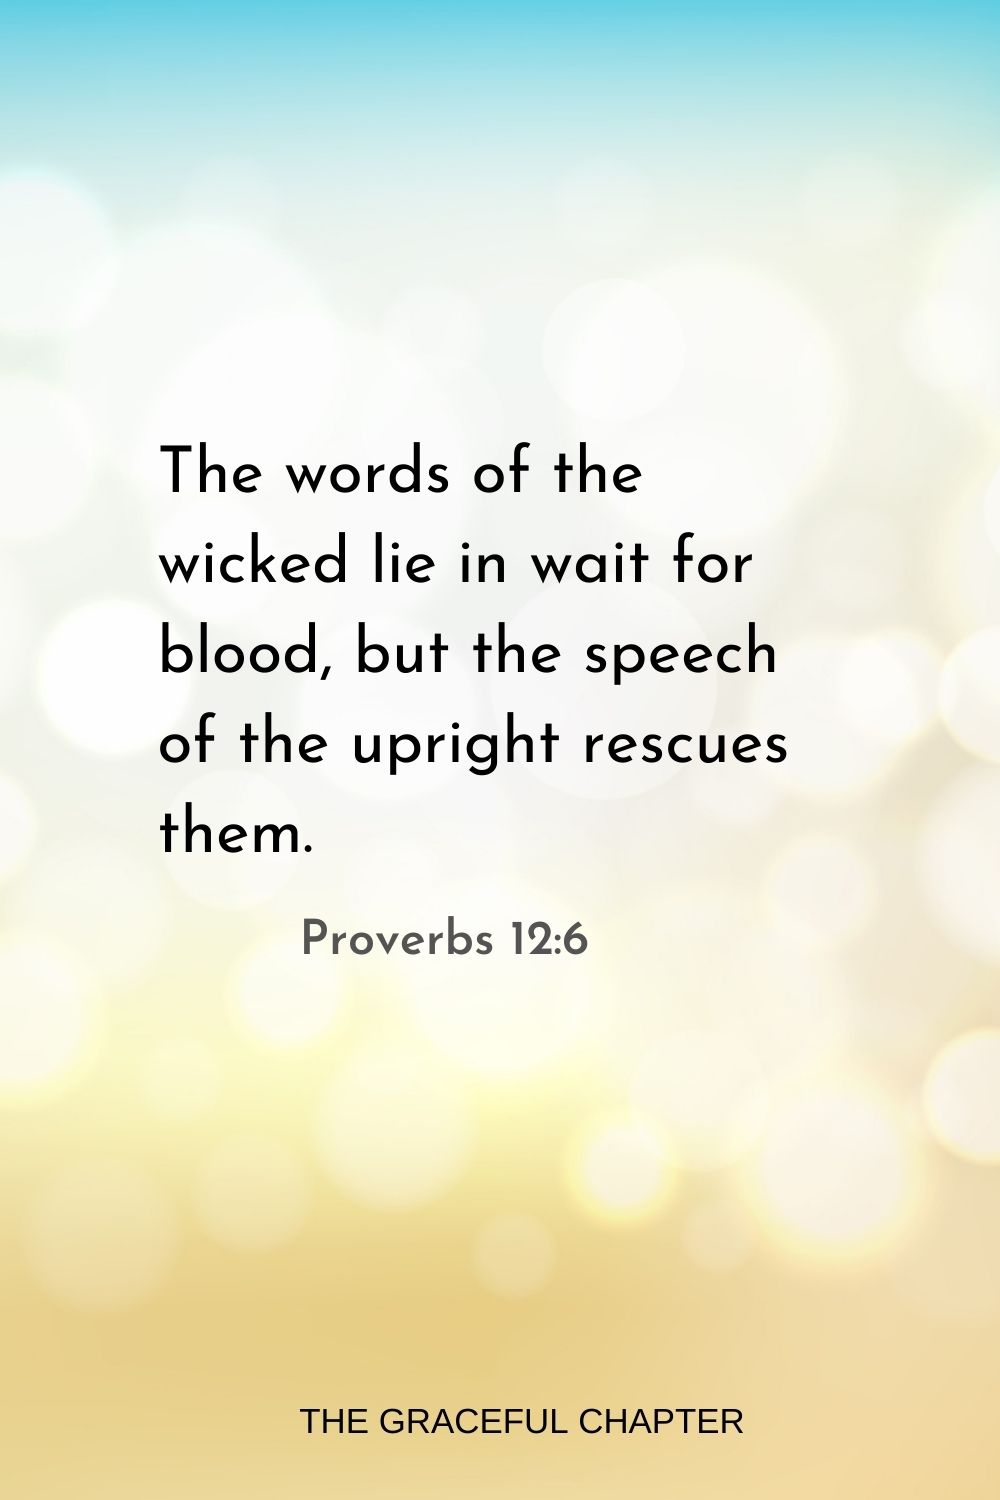 The words of the wicked lie in wait for blood, but the speech of the upright rescues them. Proverbs 12:6